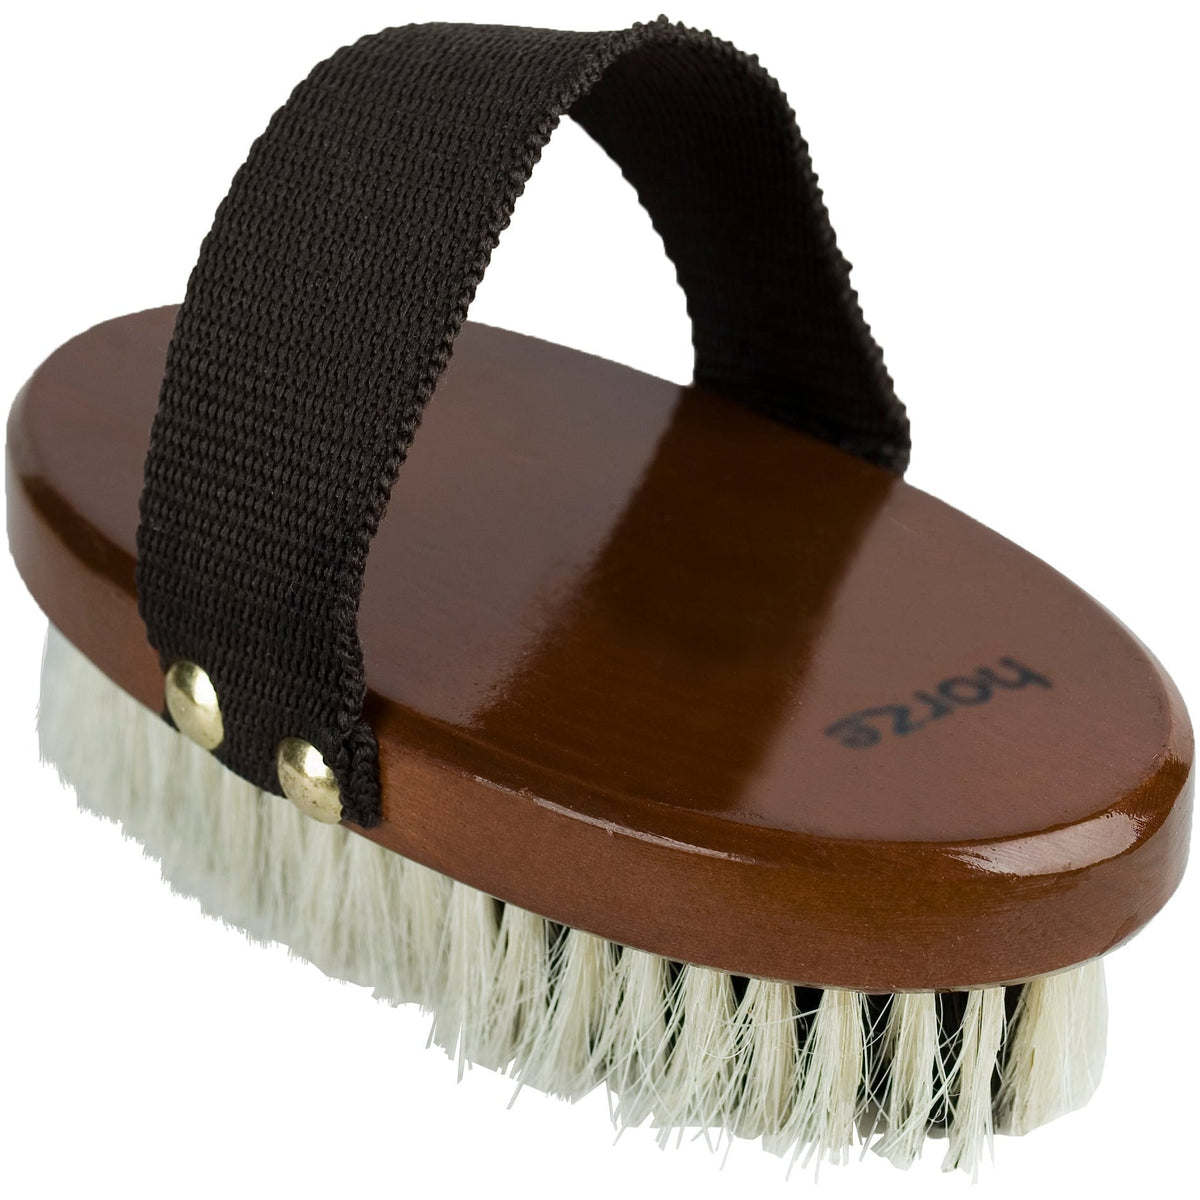 HORZE STABLE SUPPLIES Horze Natural Small Body Brush